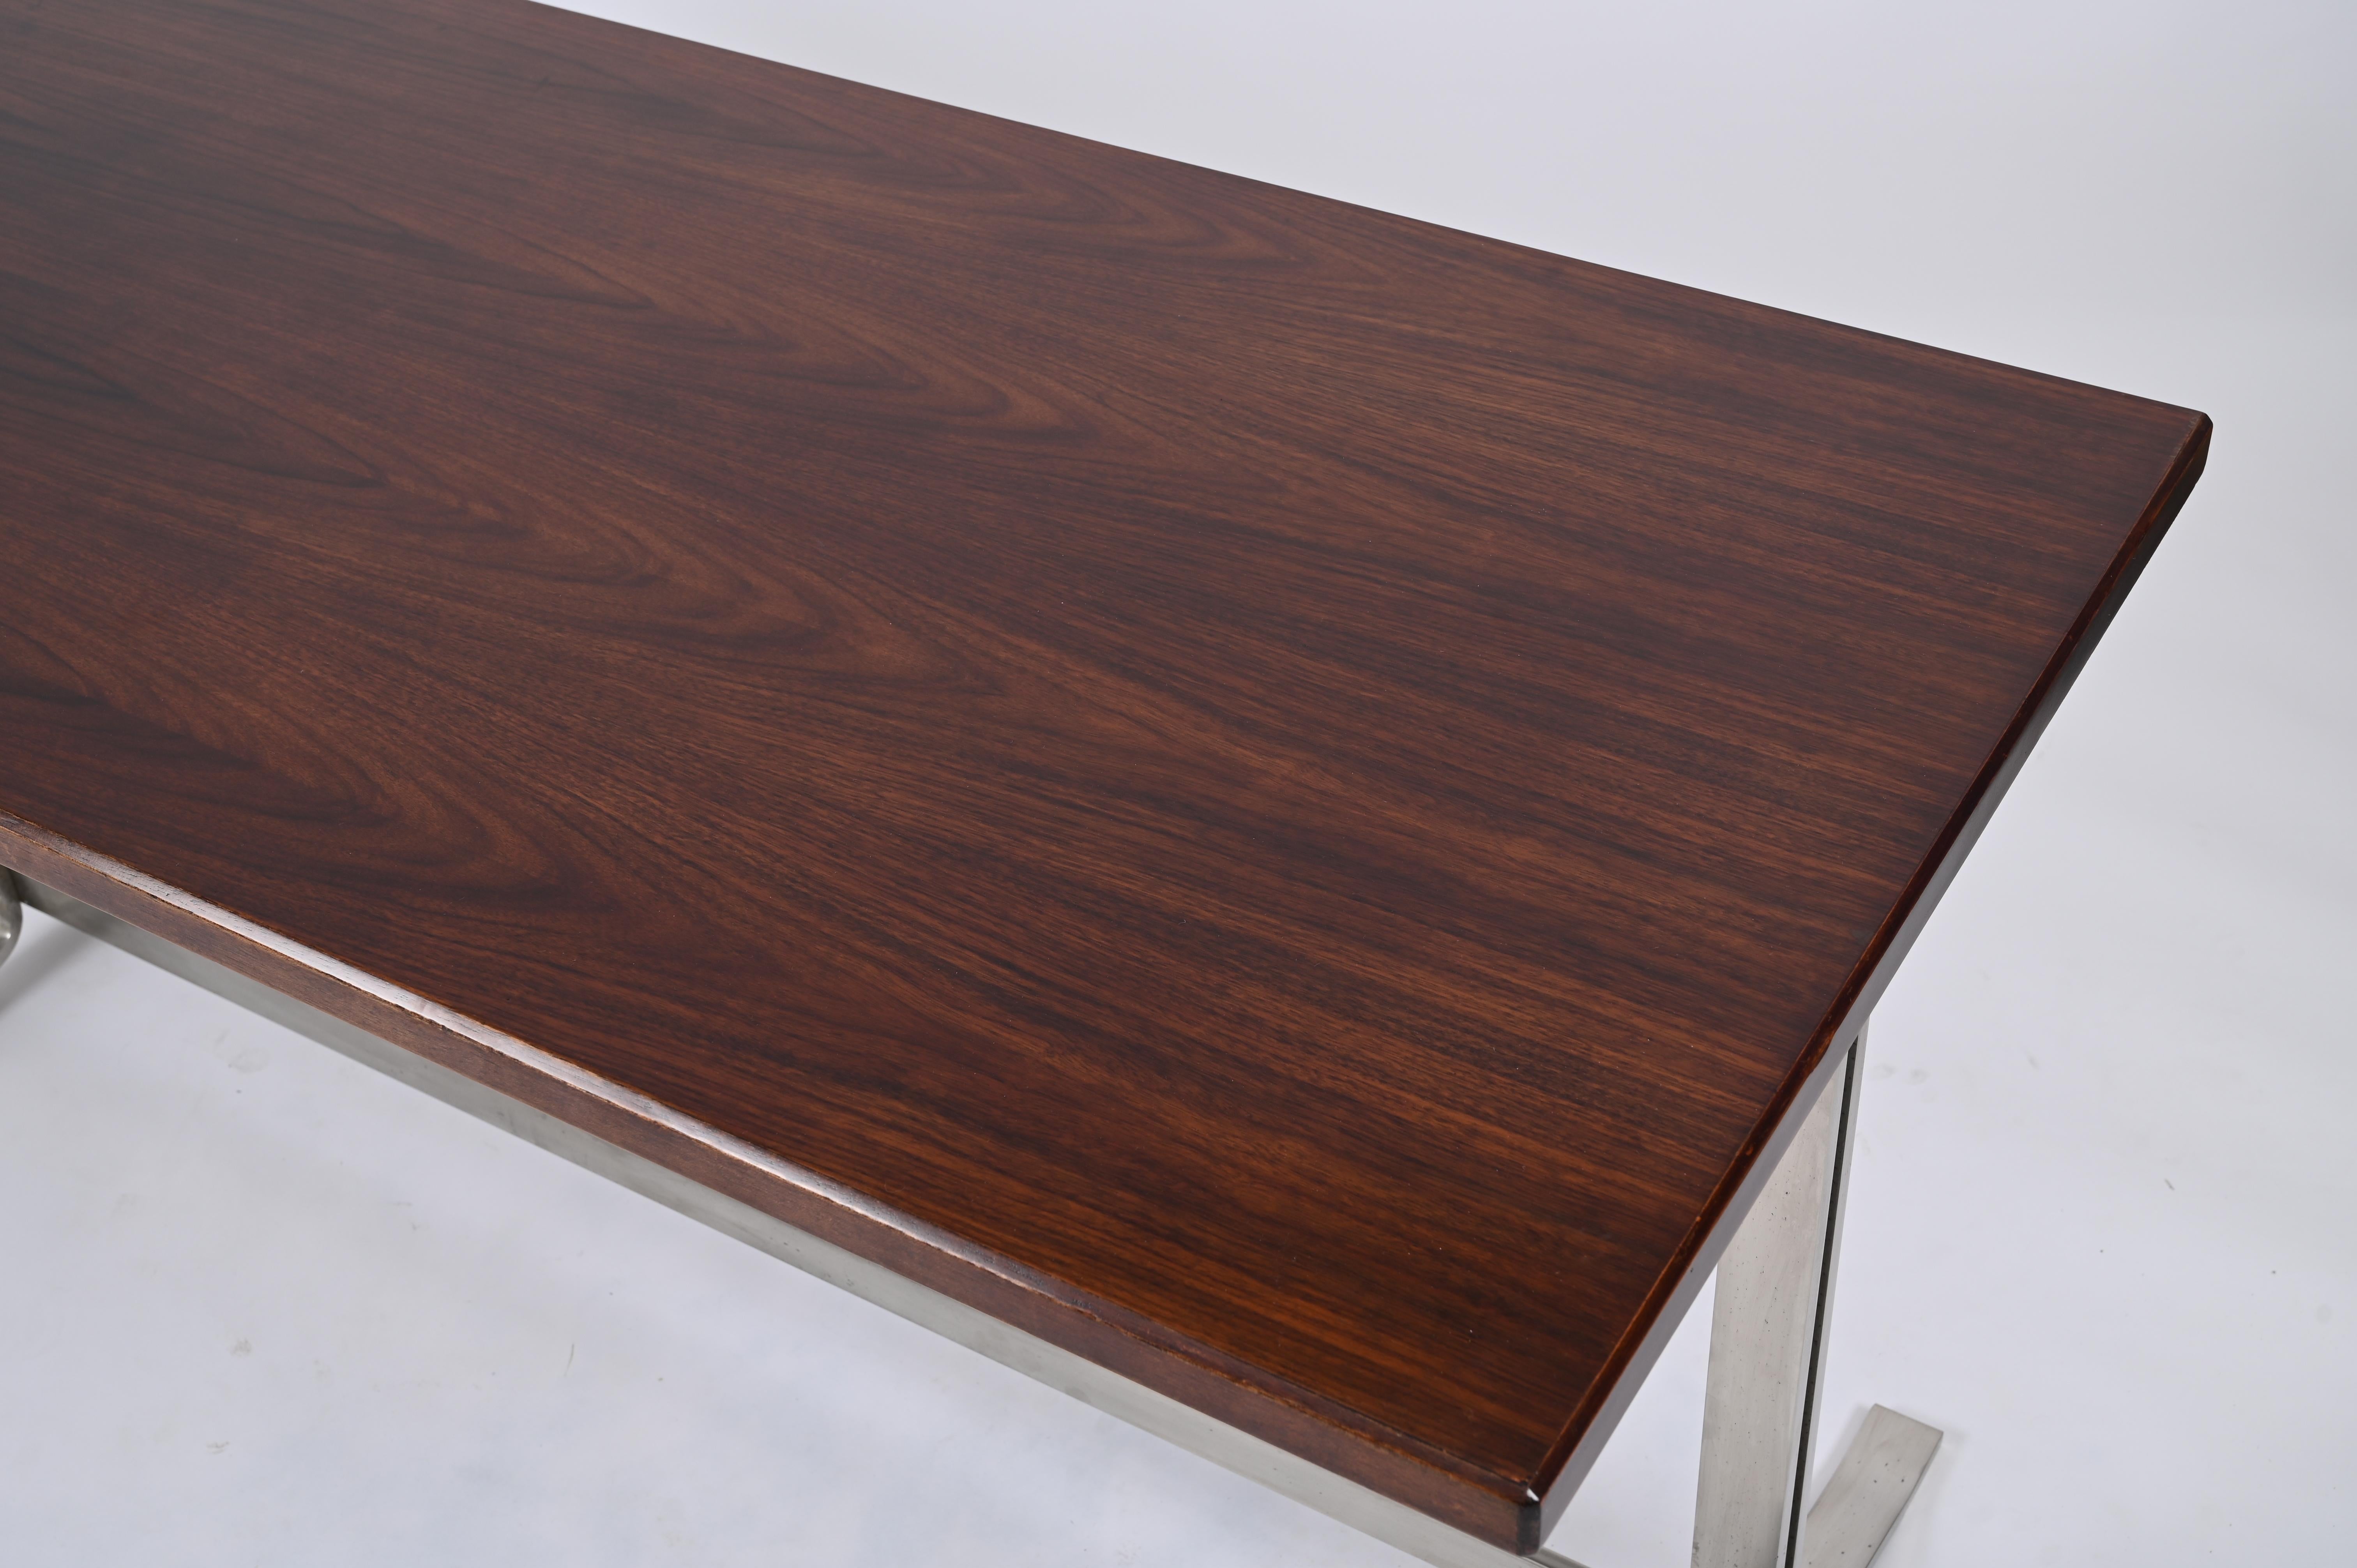 Midcentury Desk in Walnut and Steel by Moscatelli for Formanova, Italy, 1965 In Good Condition For Sale In Roma, IT